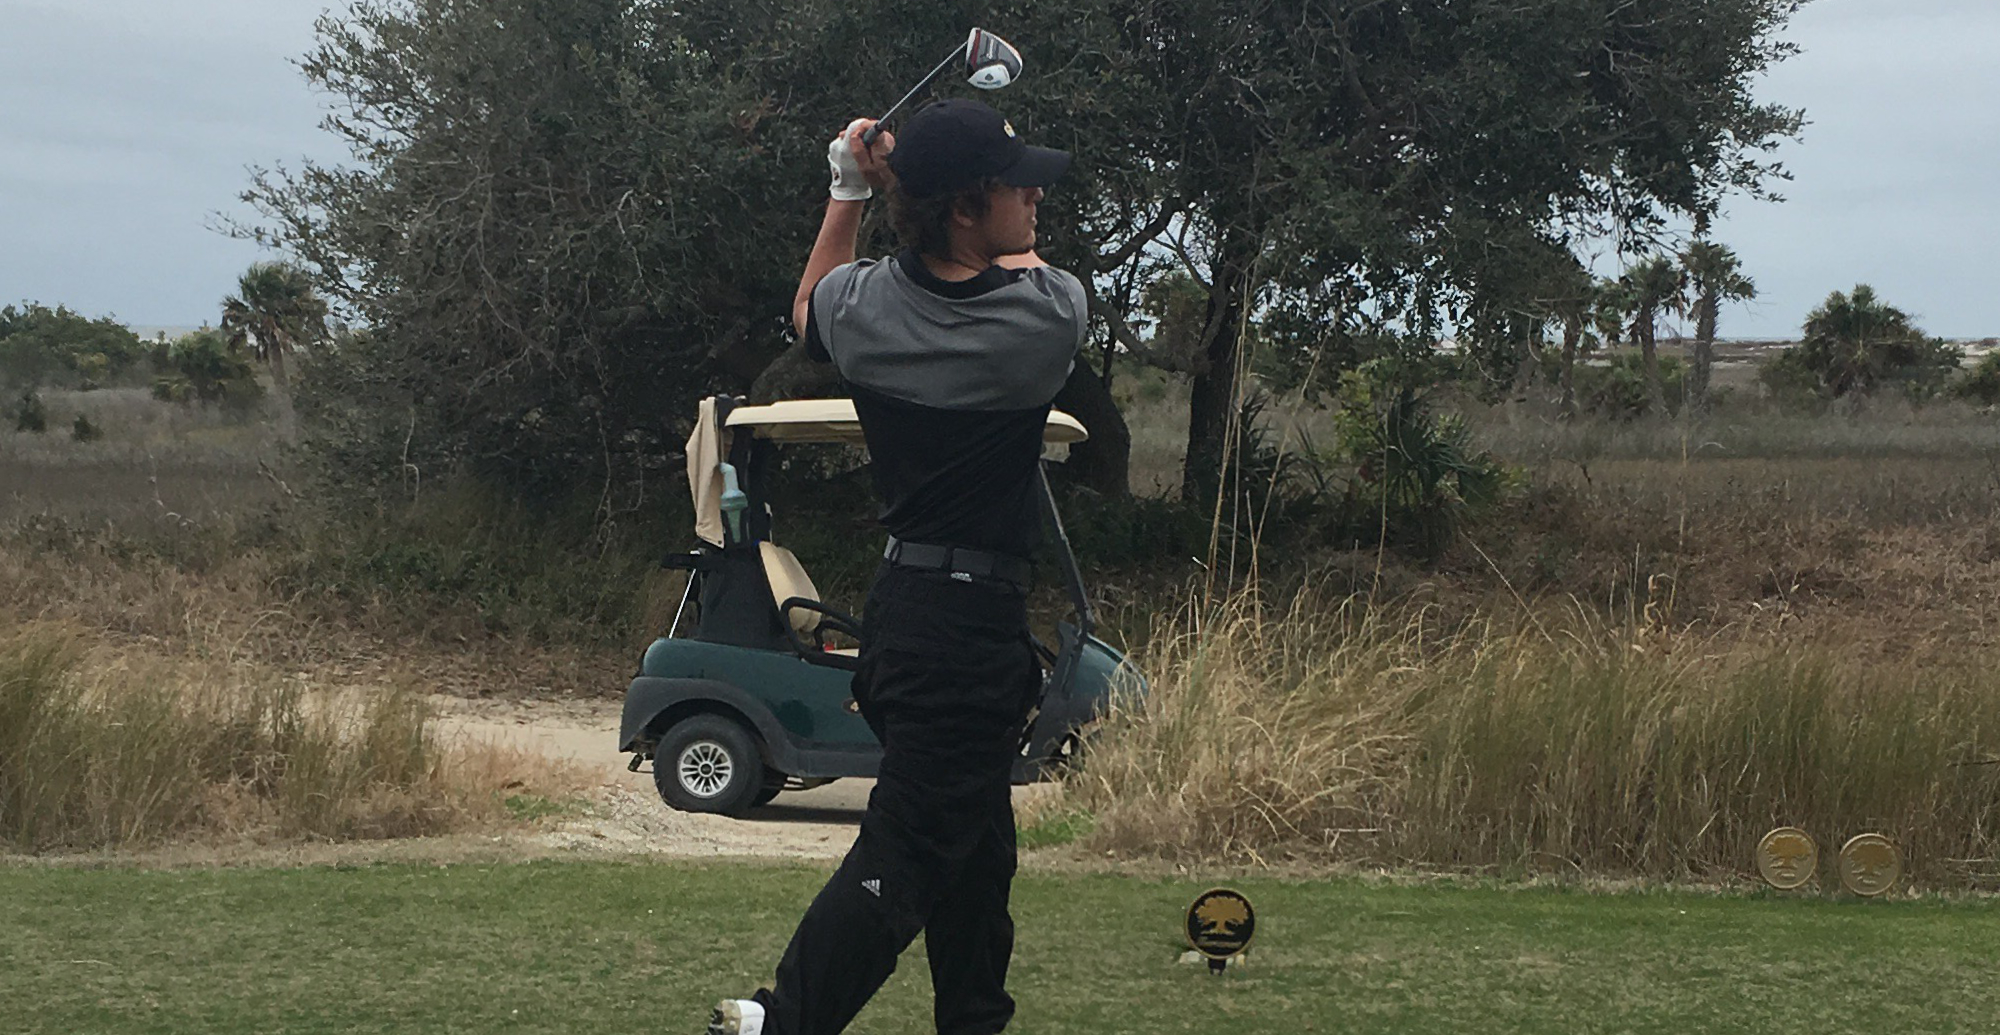 Hurricanes T 5th At Newberry Invitational With Round 2 Suspended